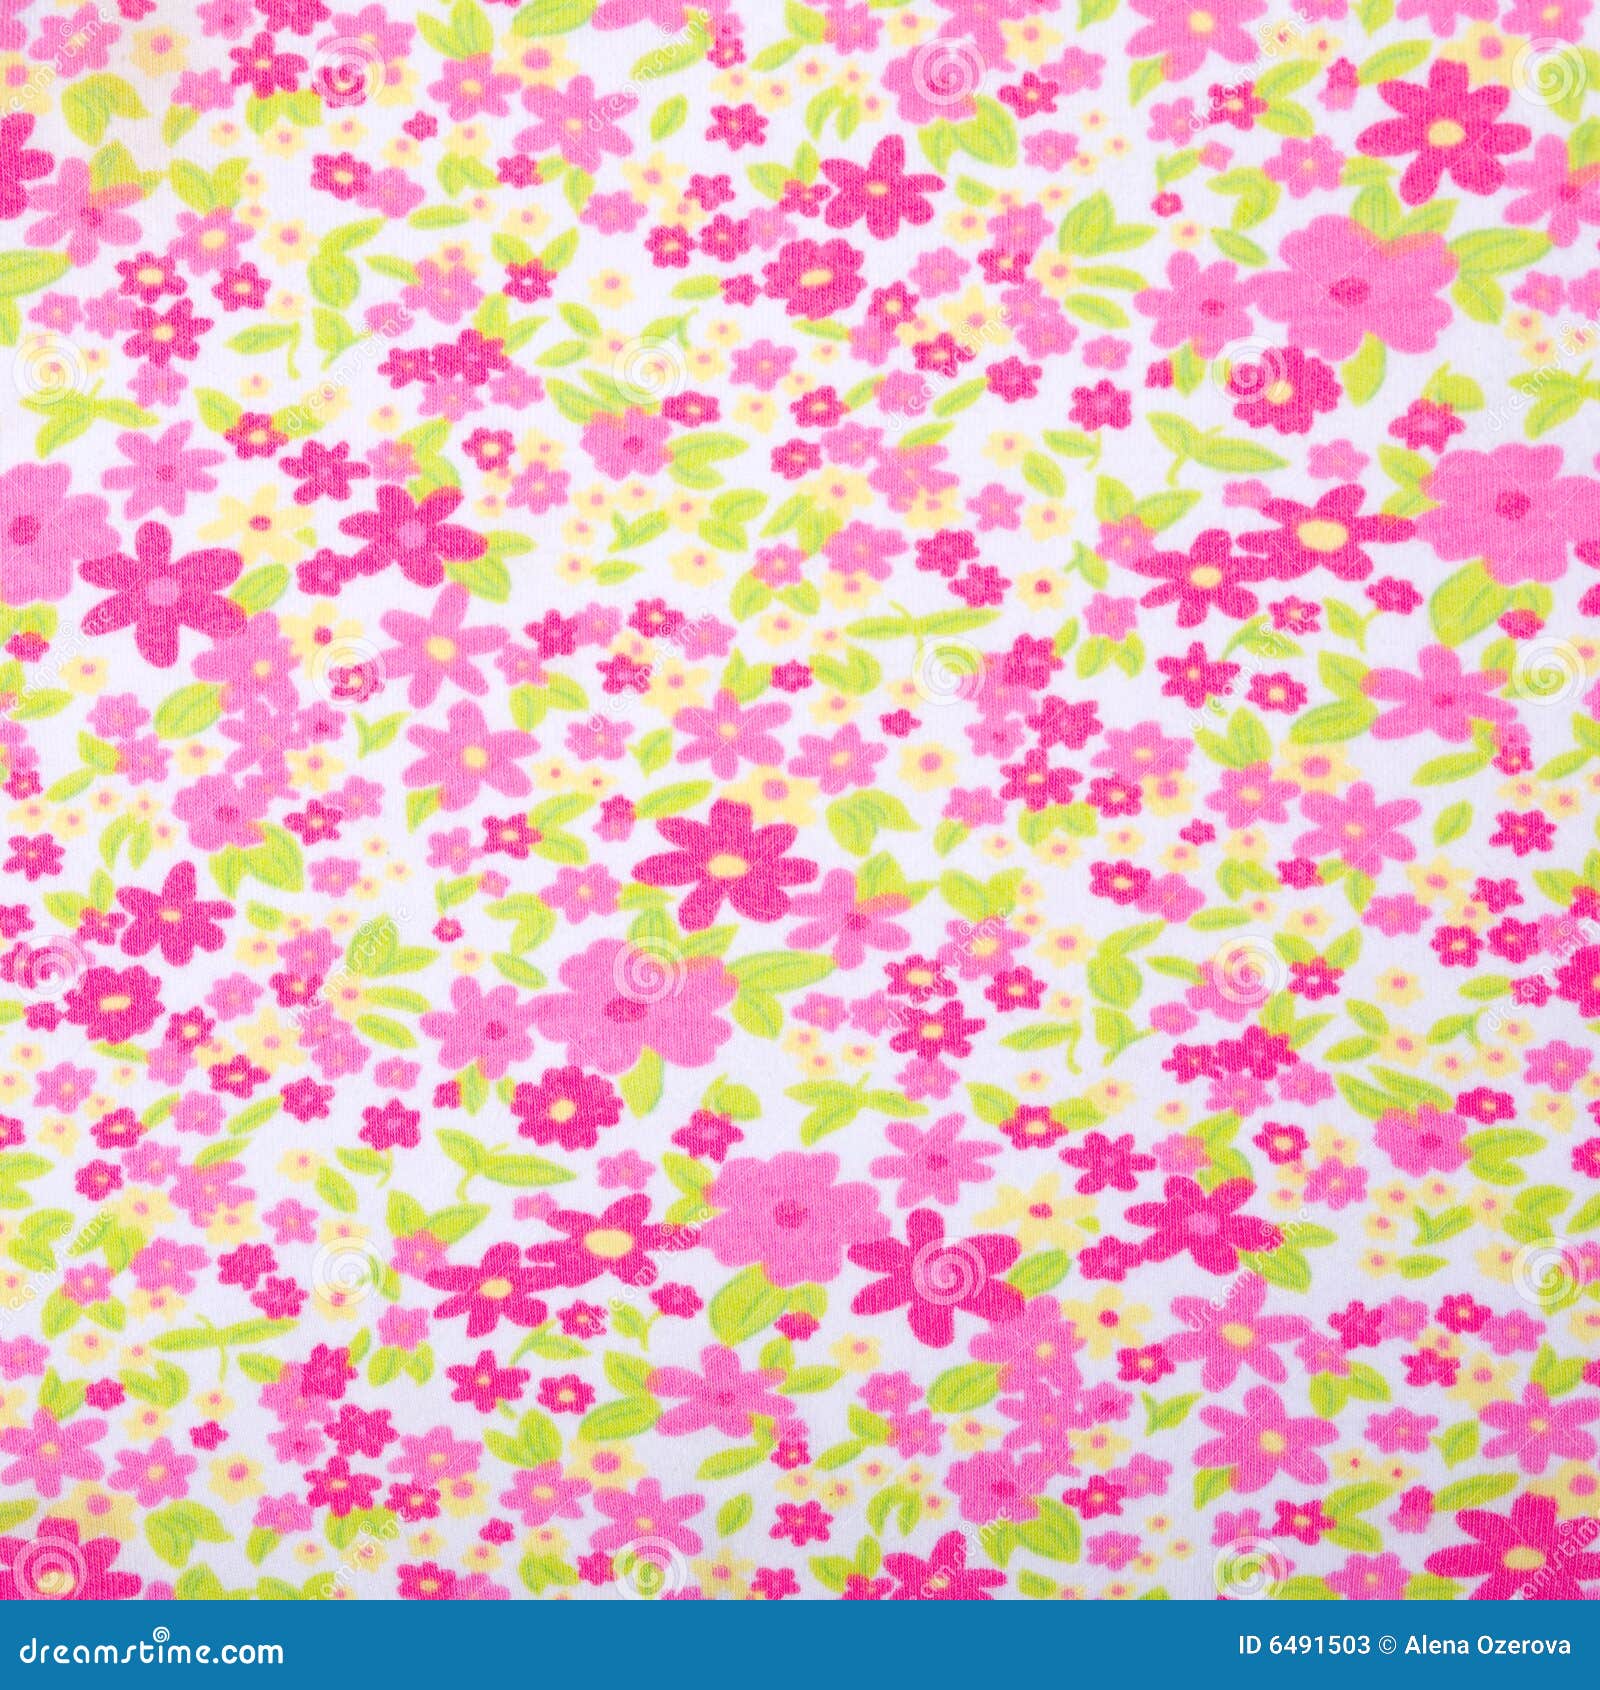 Textile flower background stock image. Image of textured - 6491503